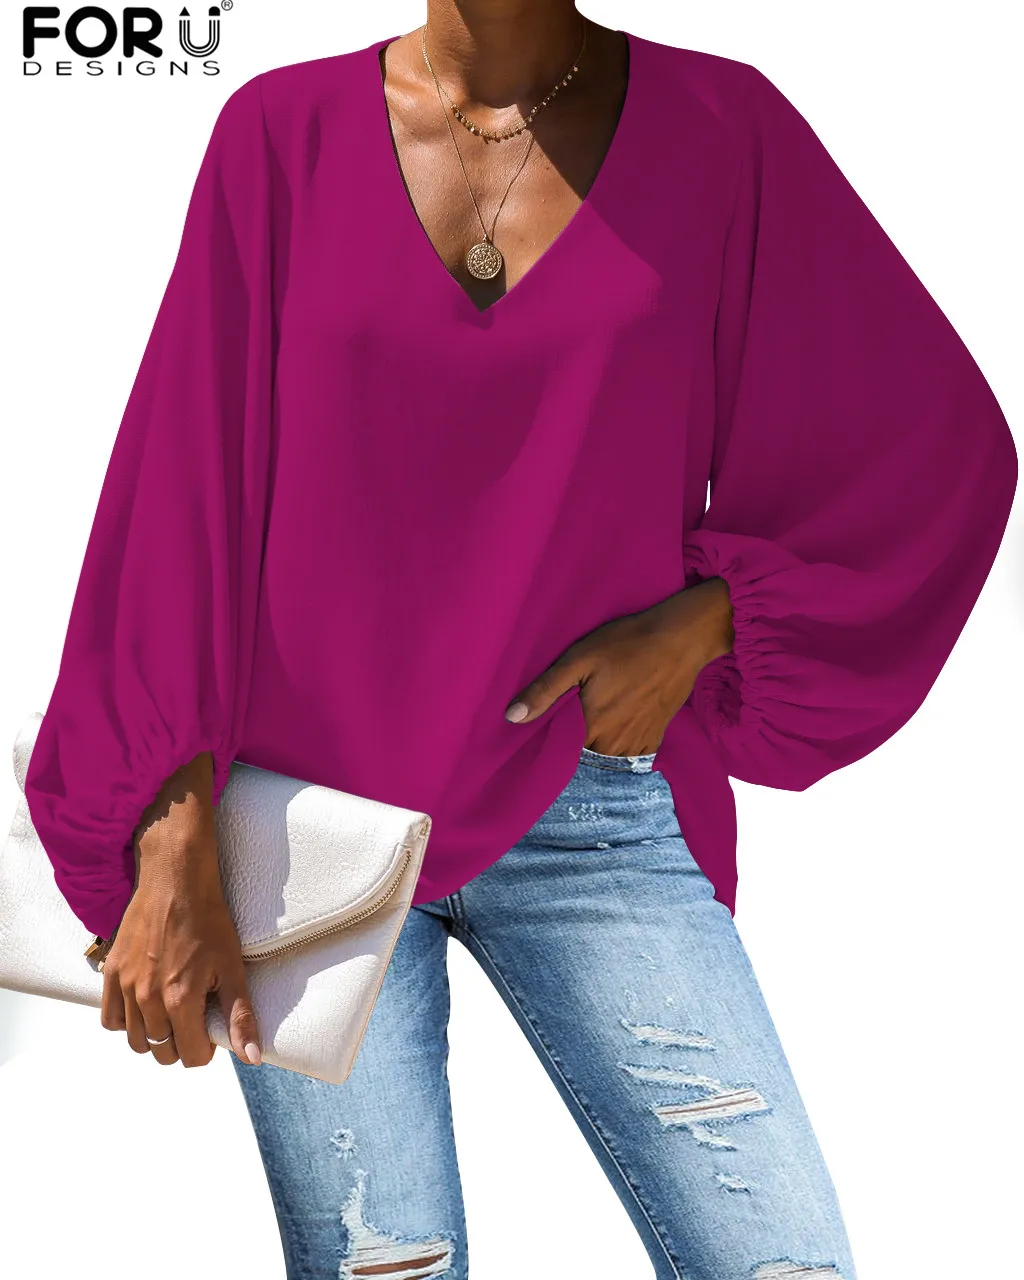 FORUDESIGNS Solid Color Full Sleeve Chiffon Shirt Summer Autumn Full Sleeve Blouse Breathable Clothes Black/Red/Gray V Neck Tops 7